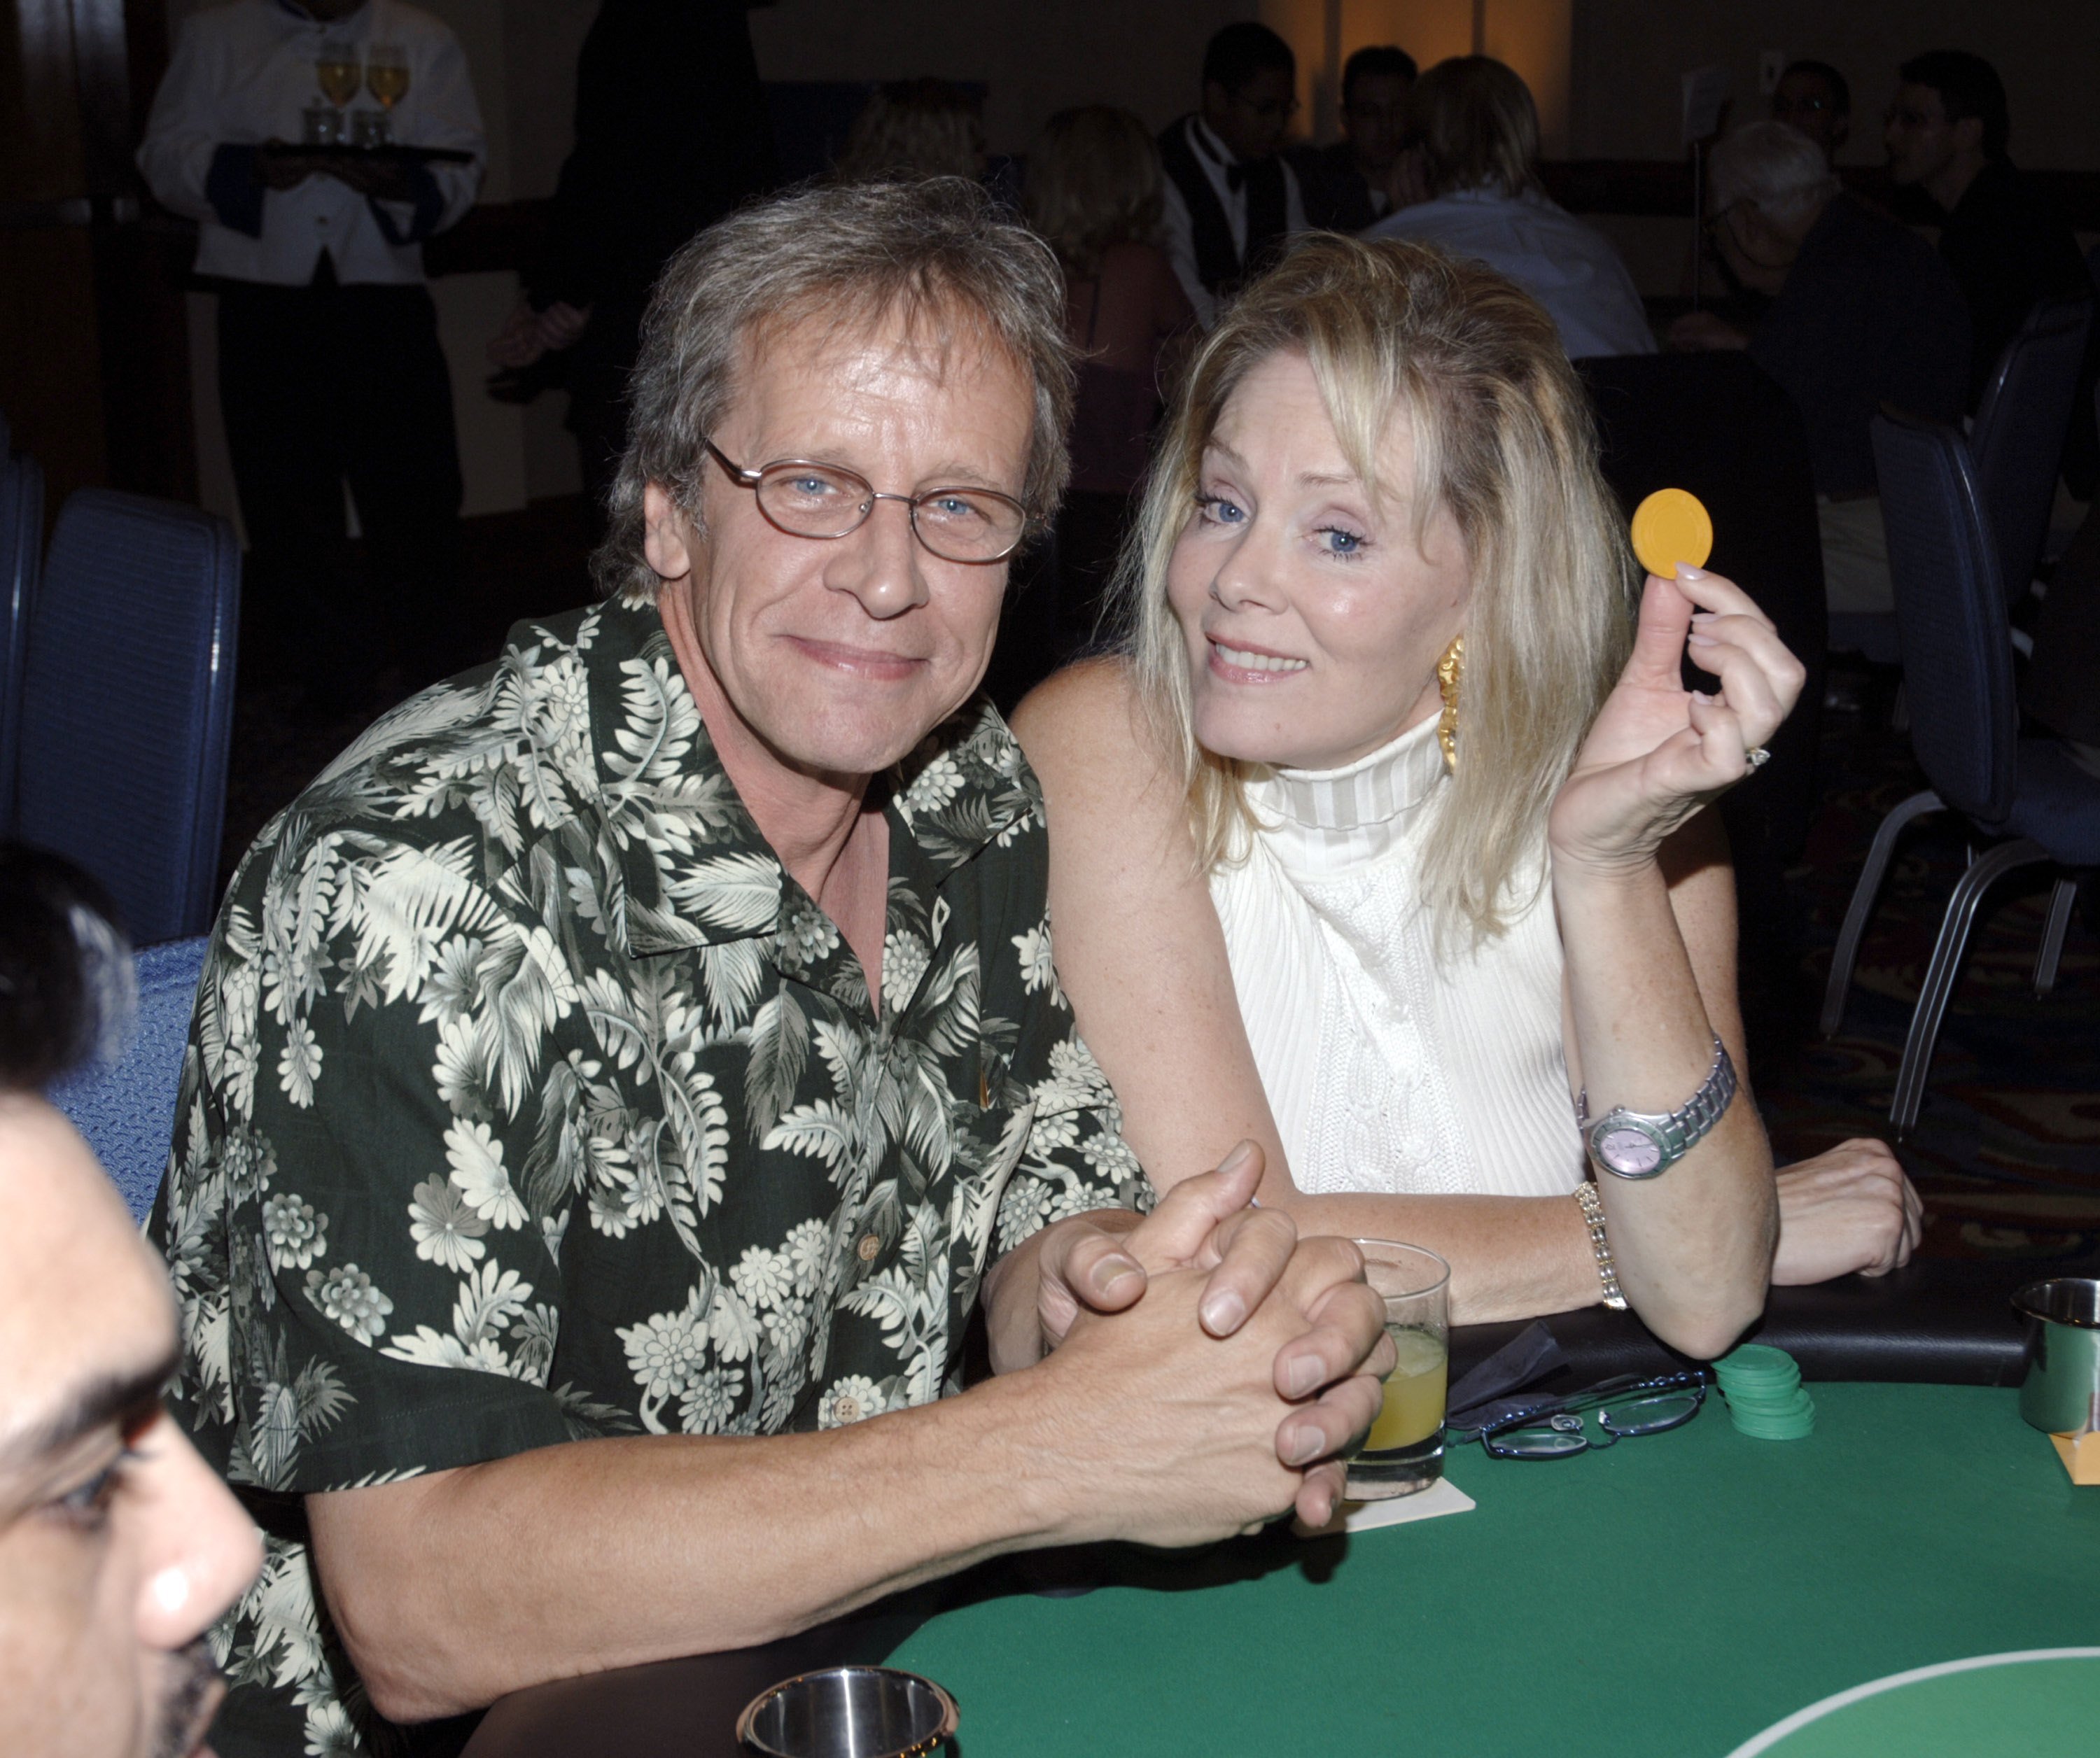  Richard Gilliland and Jean Smart attend the Texas Hold'Em Casino Night Fundraiser for the Caucus Foundation on August 19, 2006 | Photo: Getty Images